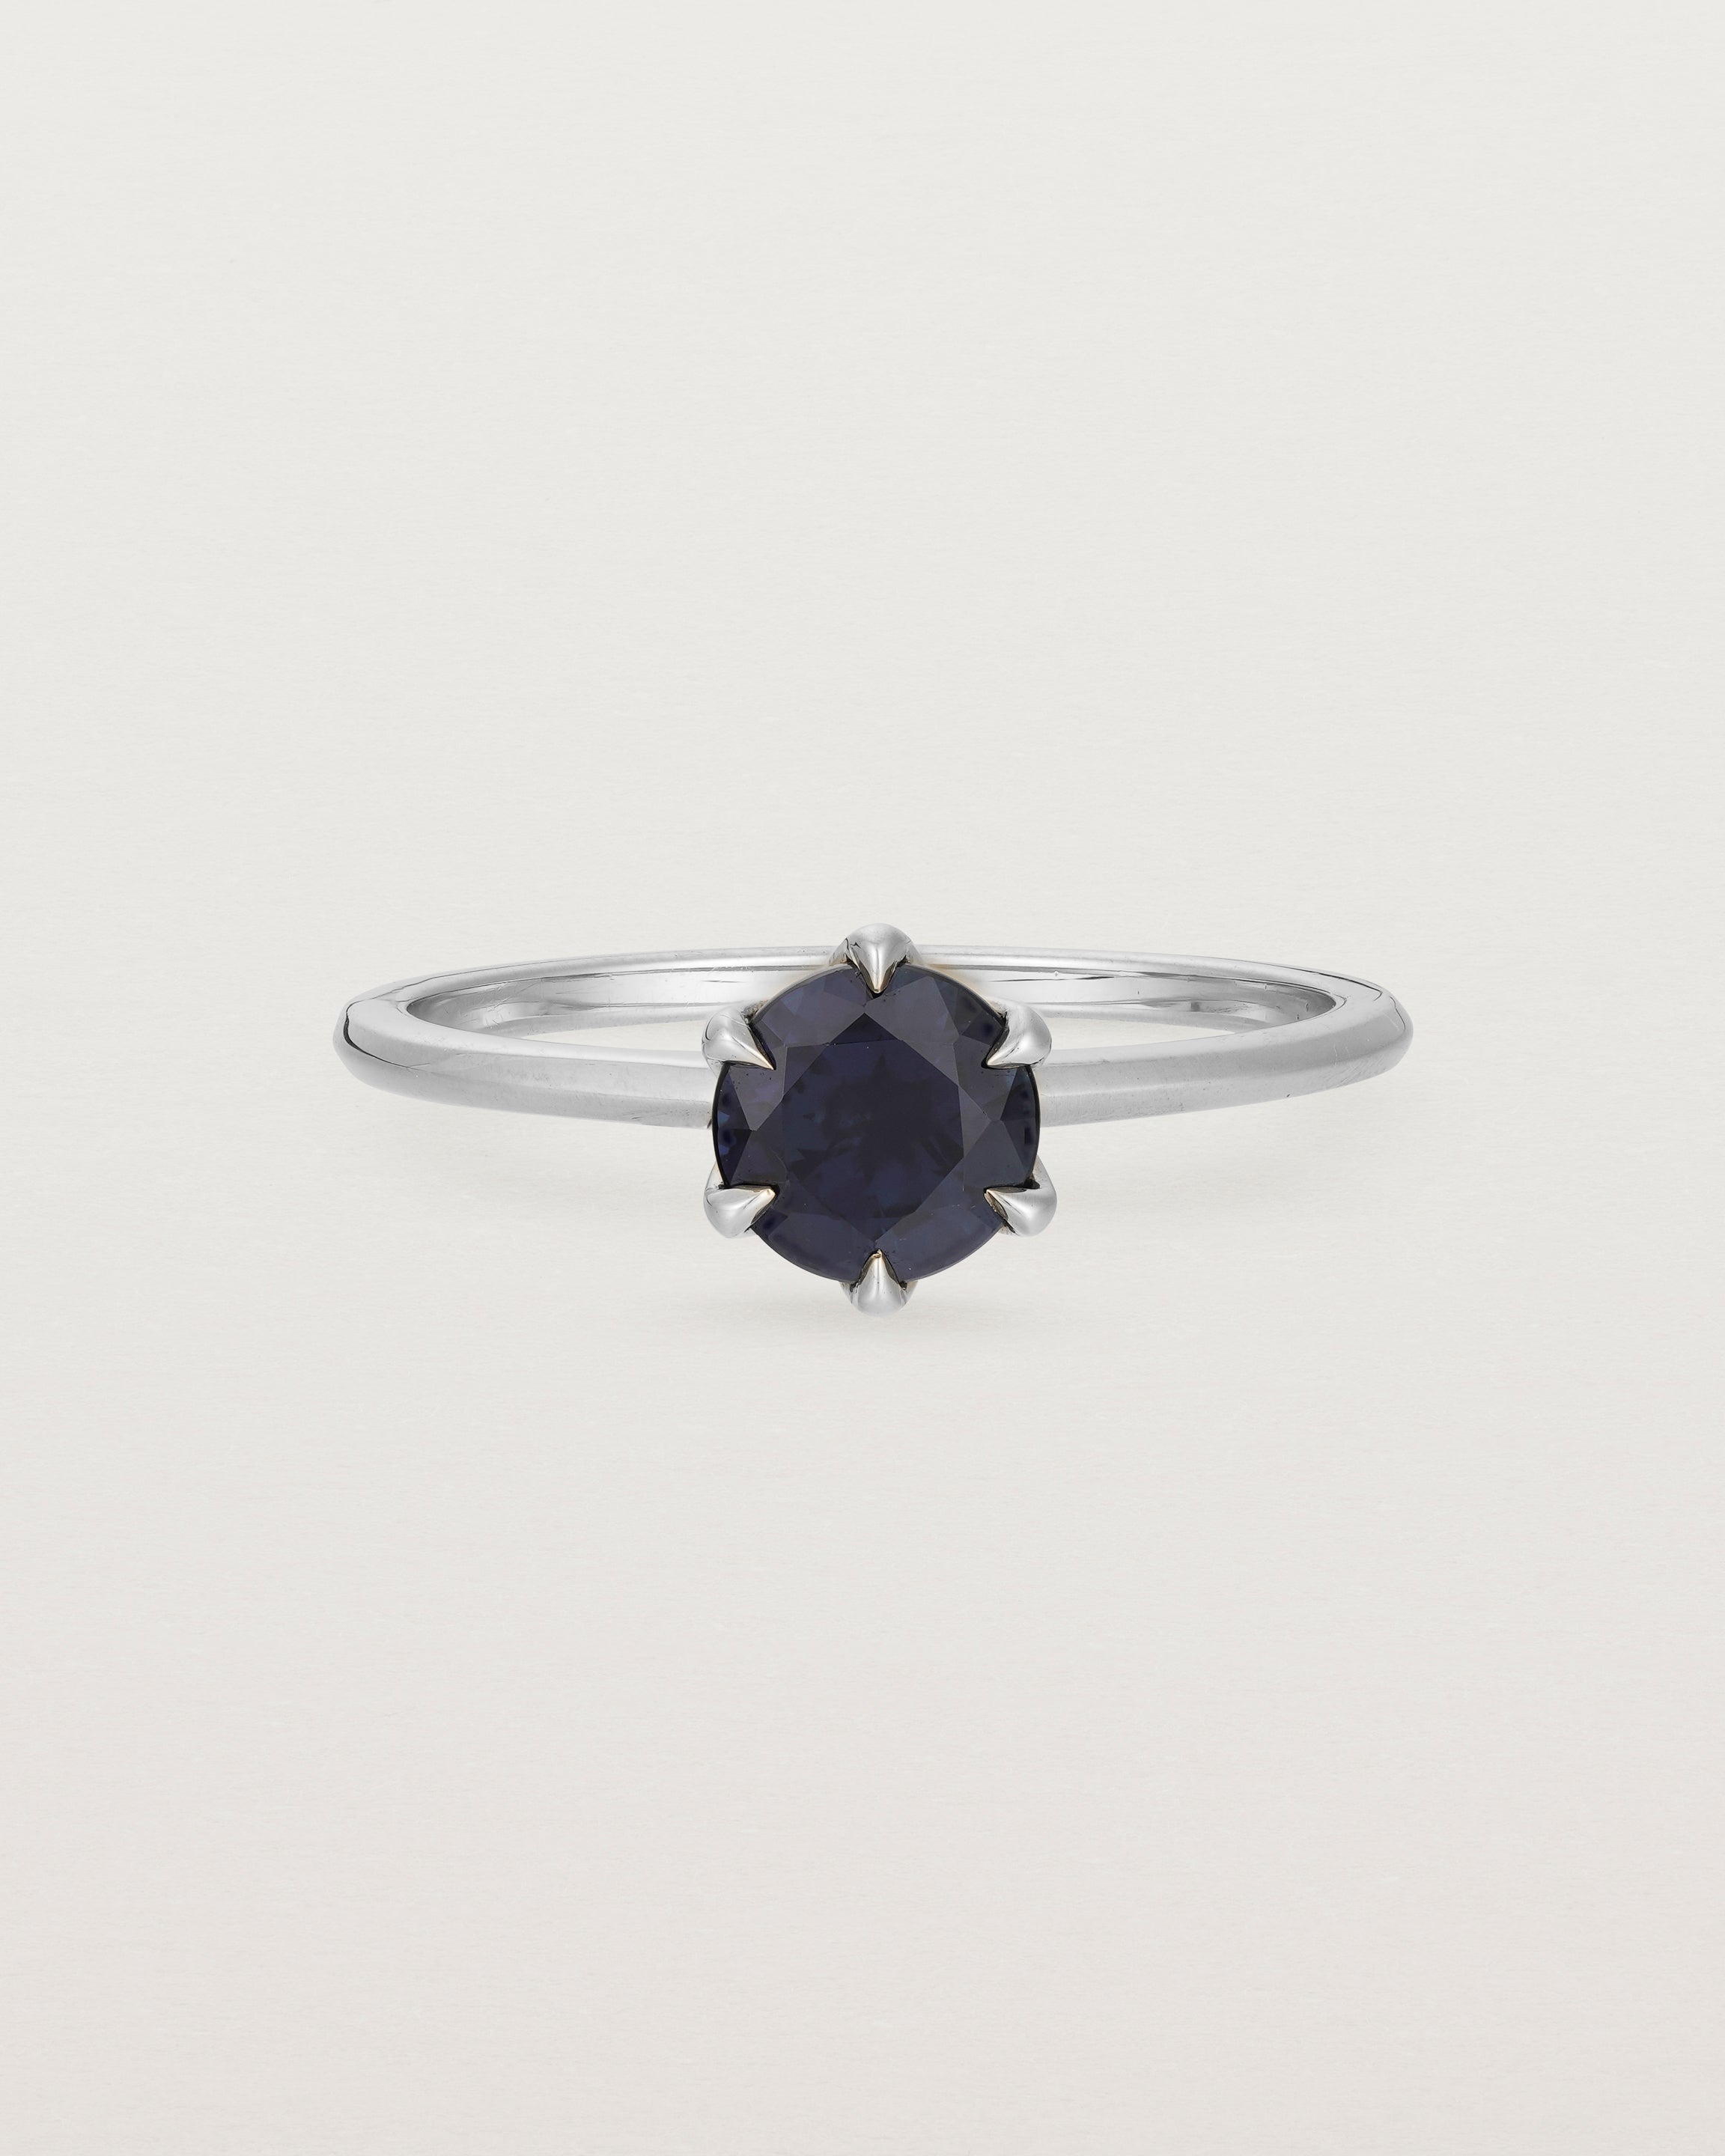 Front view of the Mandala Solitaire Ring | Australian Sapphire & Diamonds | White Gold.